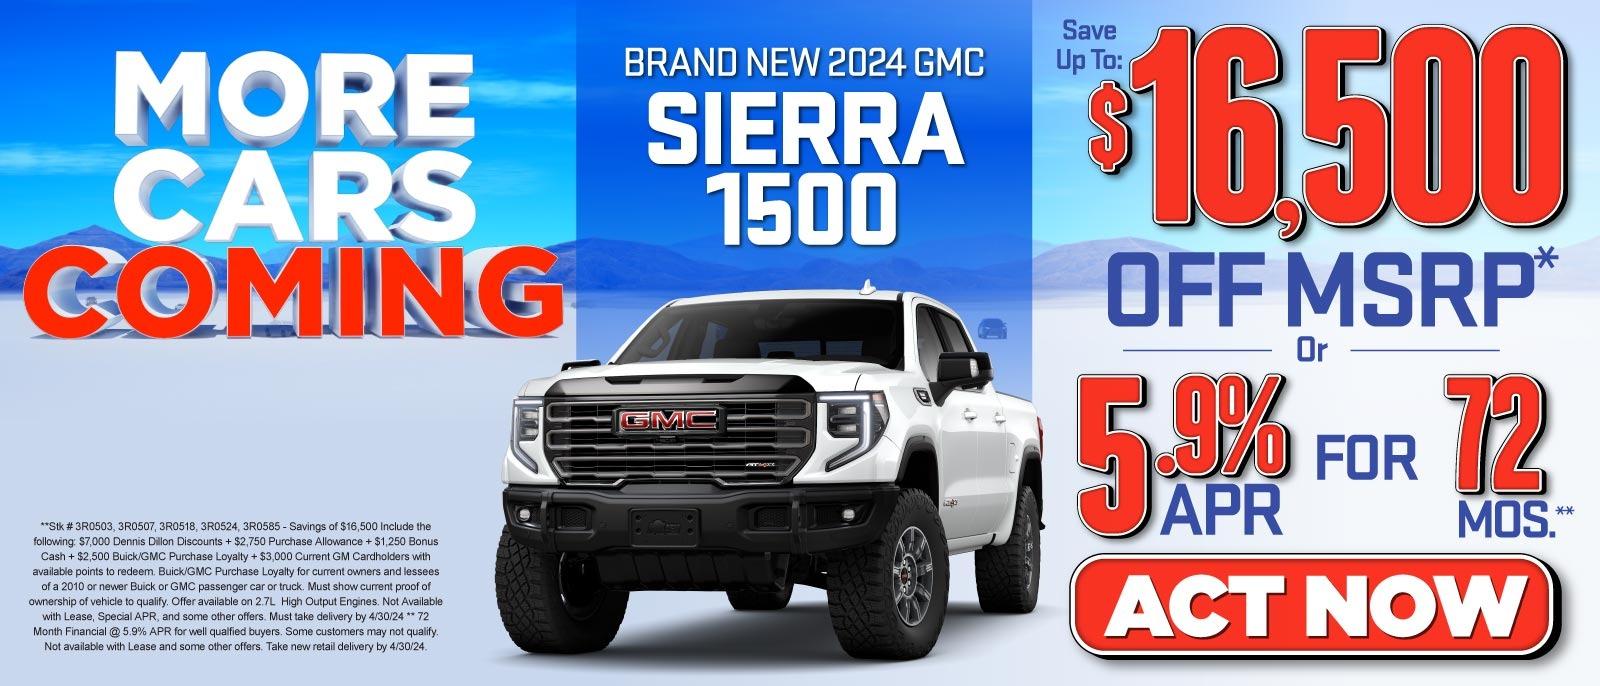 Brand New 2024 GMC Sierra 1500 - Save Up To: $16,500 Off MSRP* Or 5.9% APR For 72 Mos.** —  Act Now